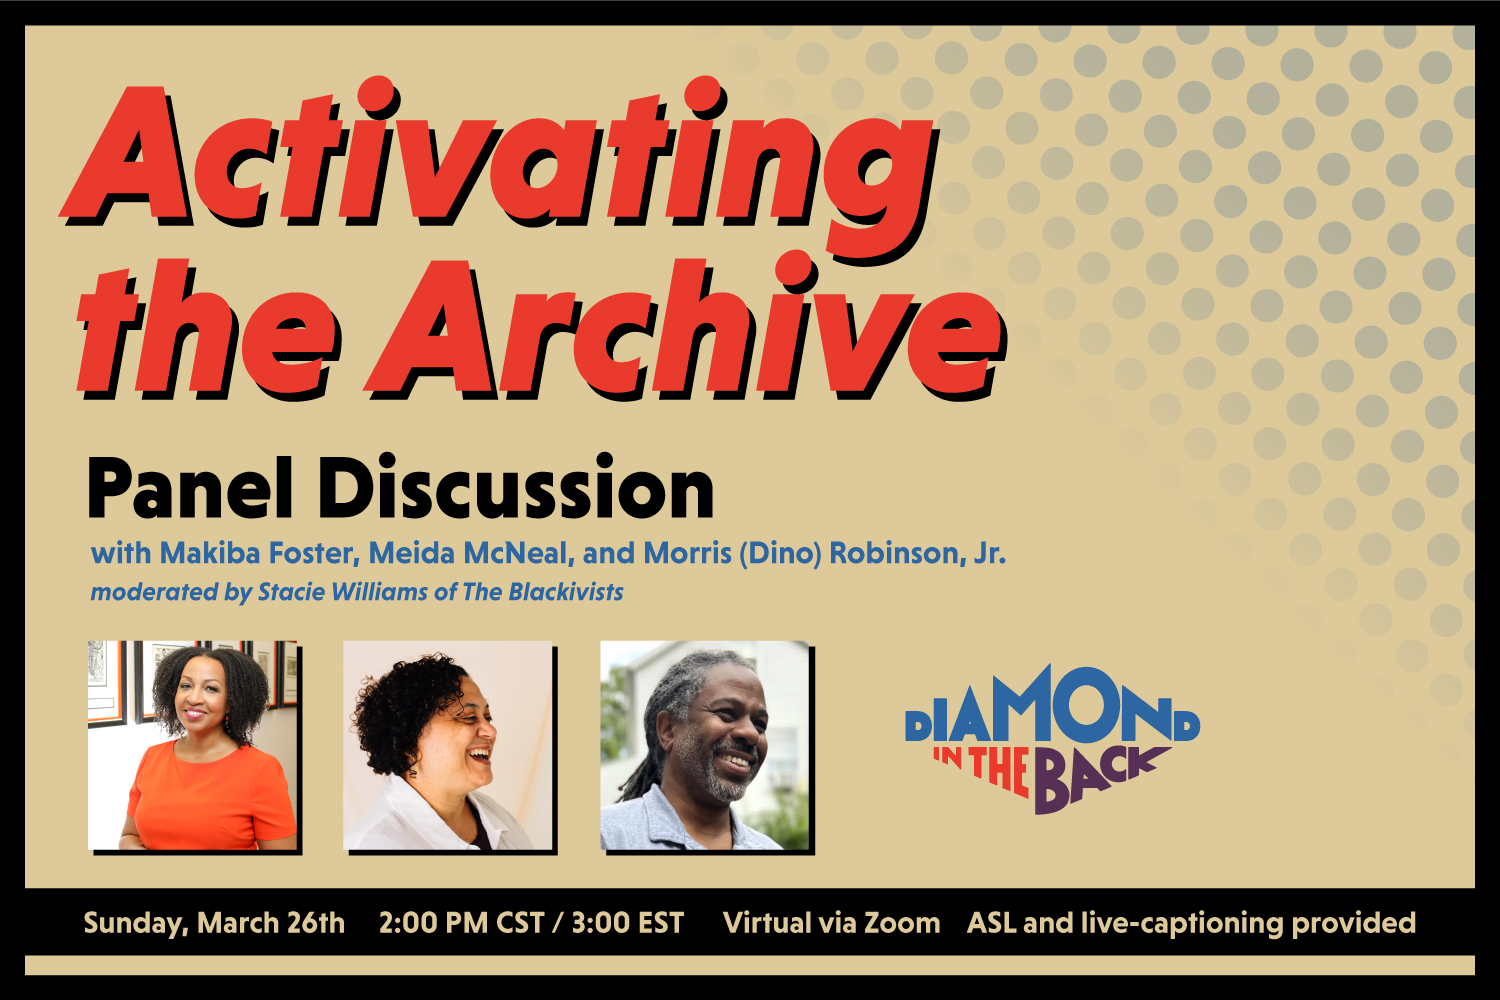 A graphic with the header text "Activating the Archive" in the color red, followed by "Panel Discussion with Makiba Foster, Meida McNeal, and Morris (Dino) Robinson, Jr., moderated by Stacie Williams of The Blackivists. Below that text there are three headshots of the presenters and the Diamond in the Back logo in blue, red, and purple. The text at the bottom says "Sunday, March 26th, 2:00PM CST/ 3:00 EST, Virtual via Zoom, ASL and live-captioning provided"